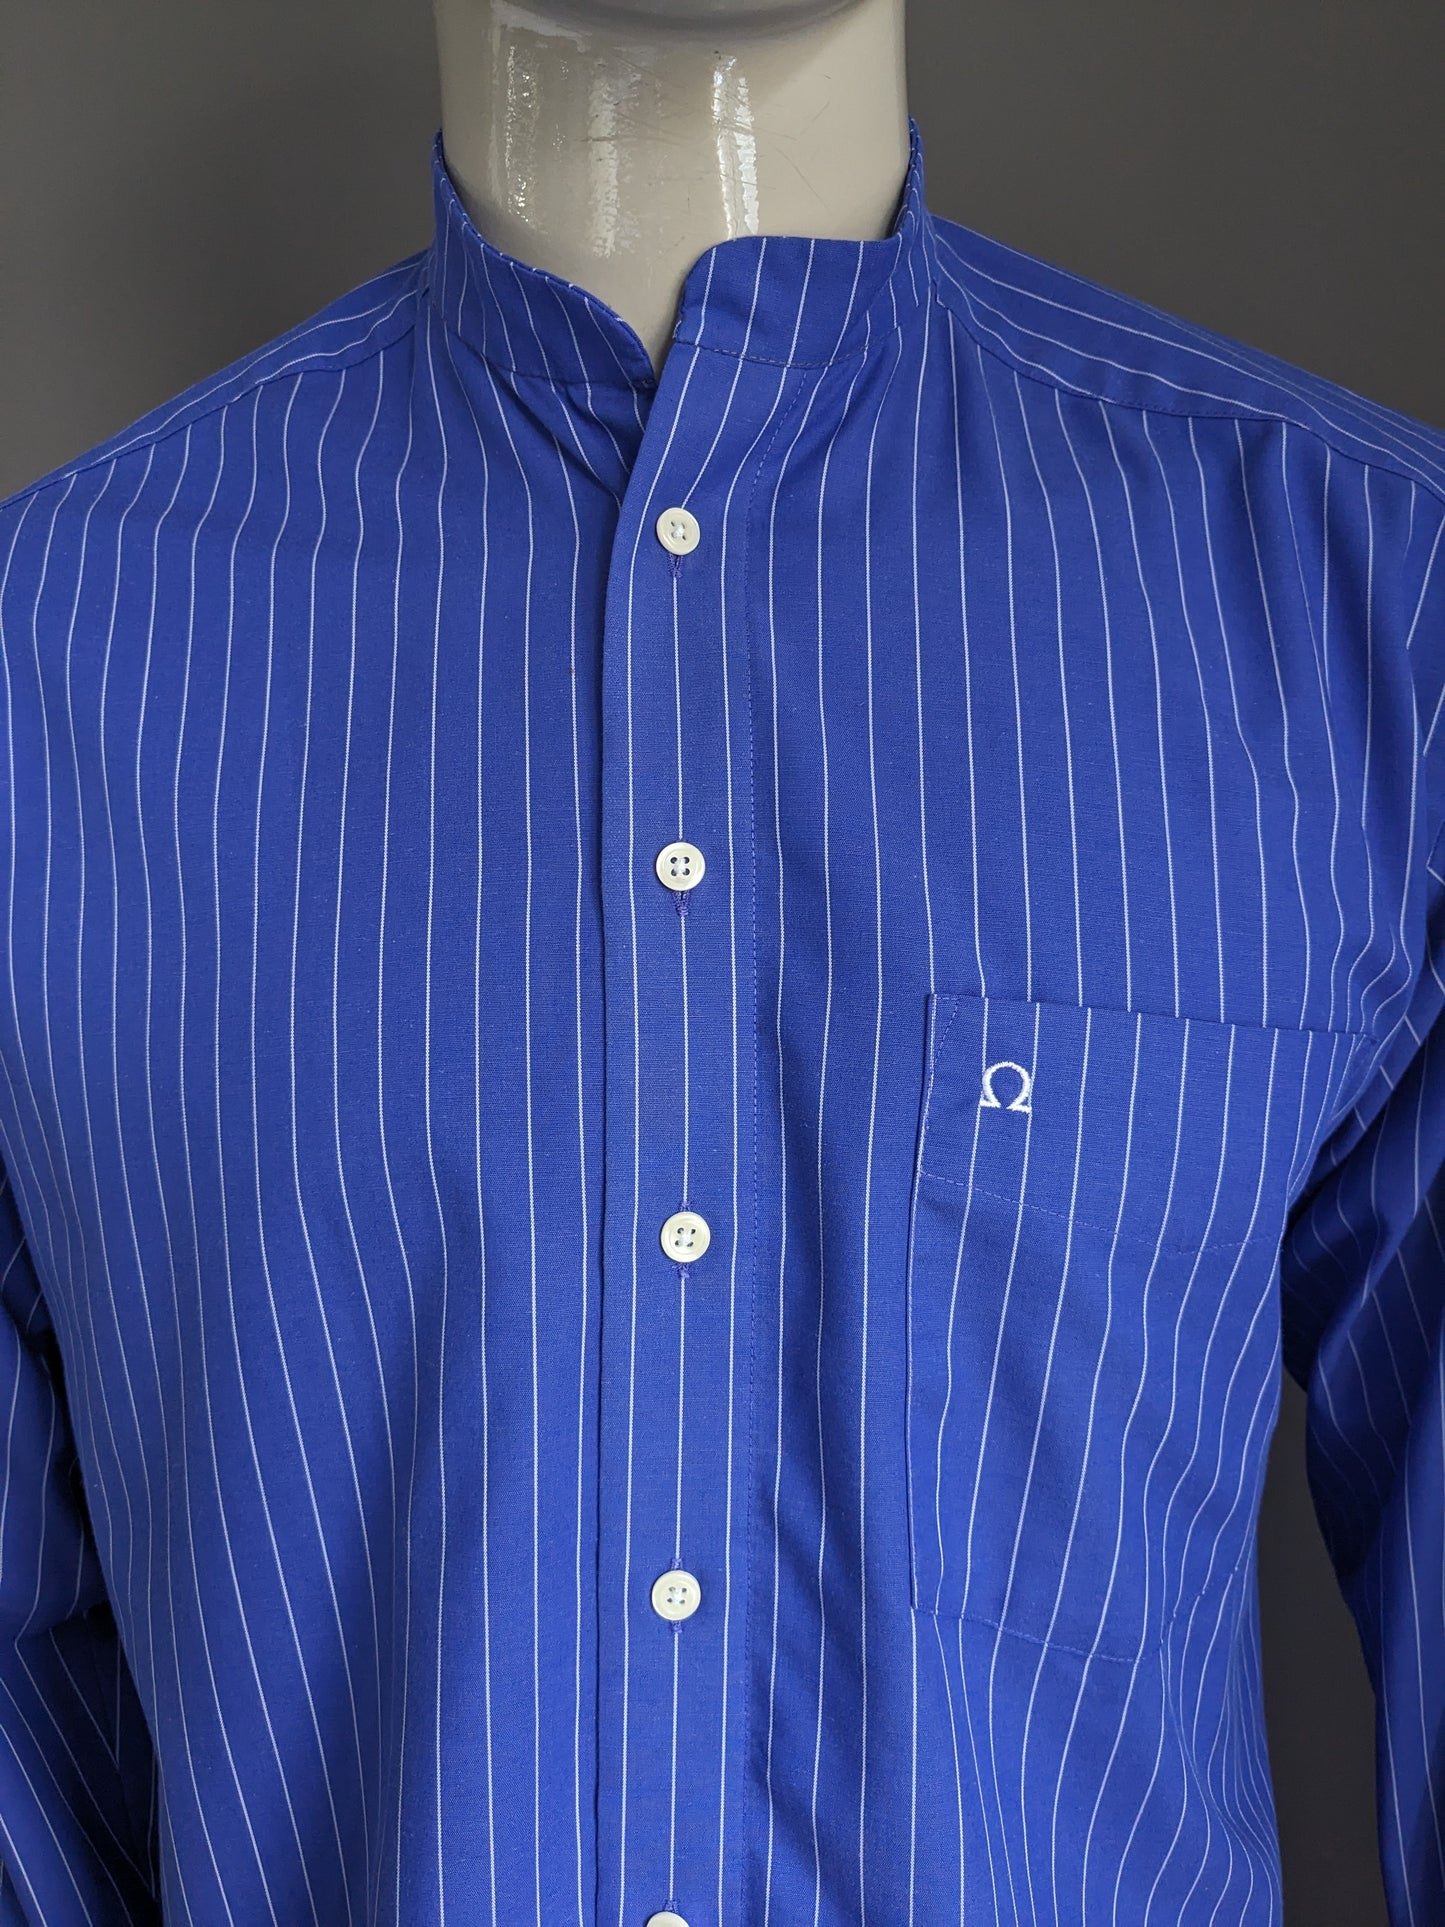 Vintage Olymp Luxor shirt with Mao / Farmer / Standing Collar. Blue white striped. Size L.